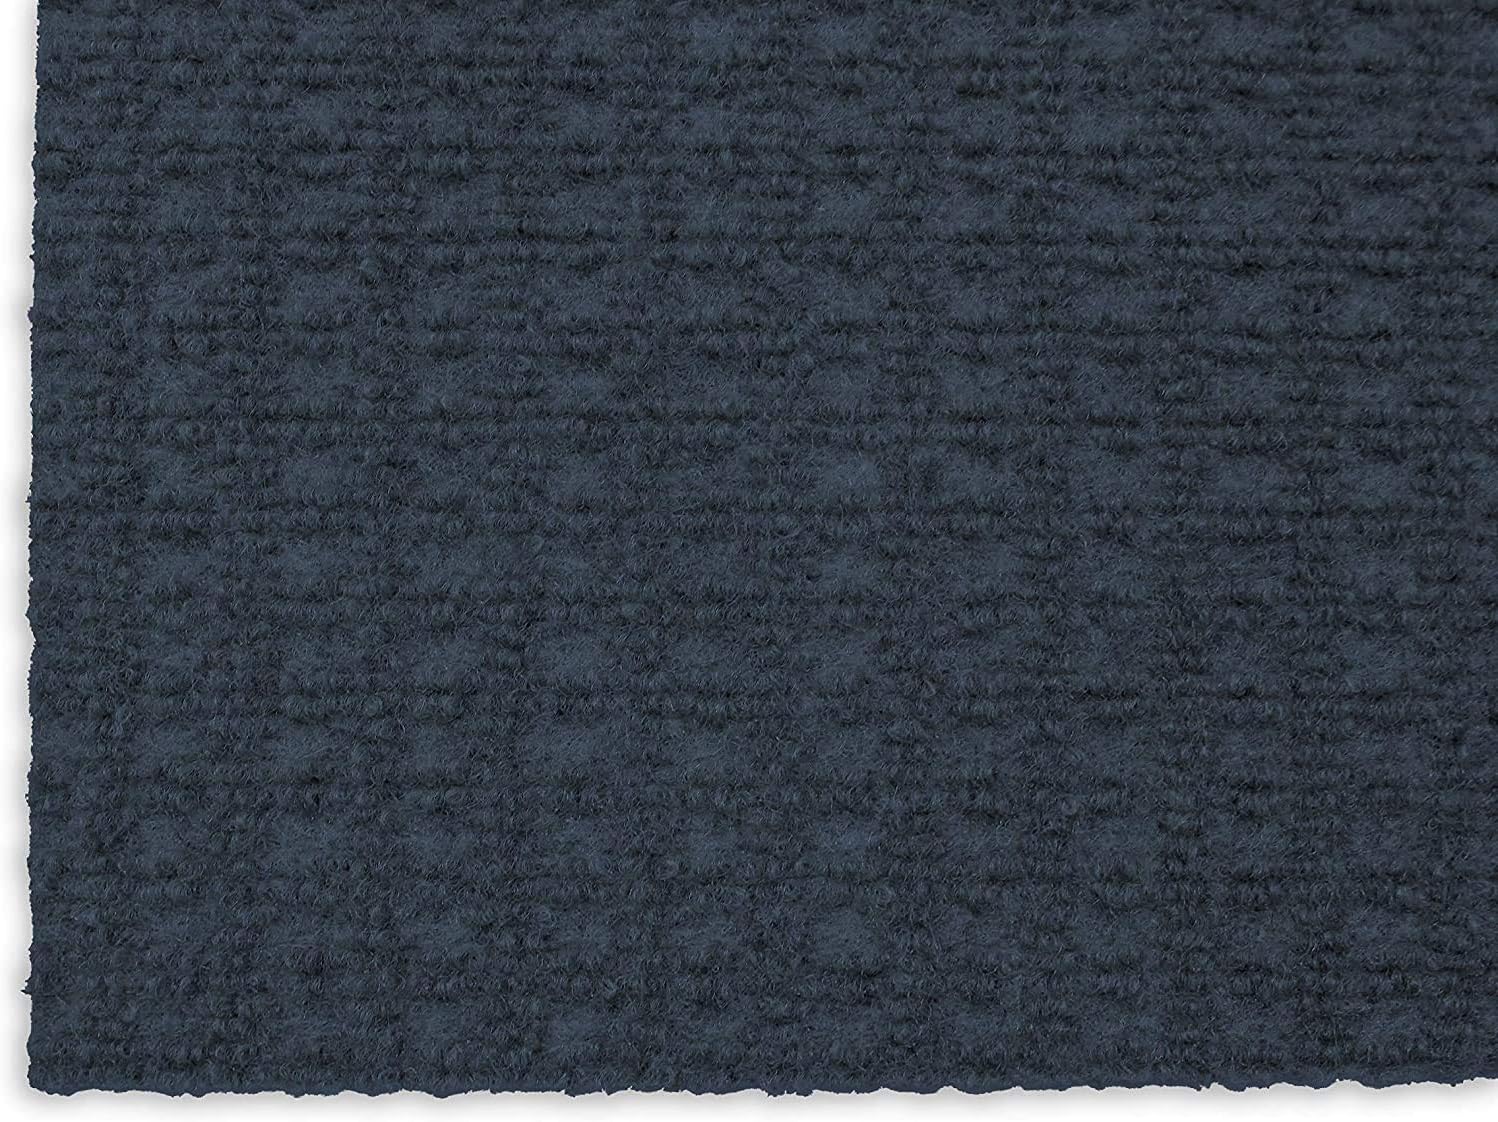 Koeckritz Rugs Soft and Durable Interlace Indoor - Outdoor Area Rugs Lightweight and Flexible (Color: Ocean Blue)